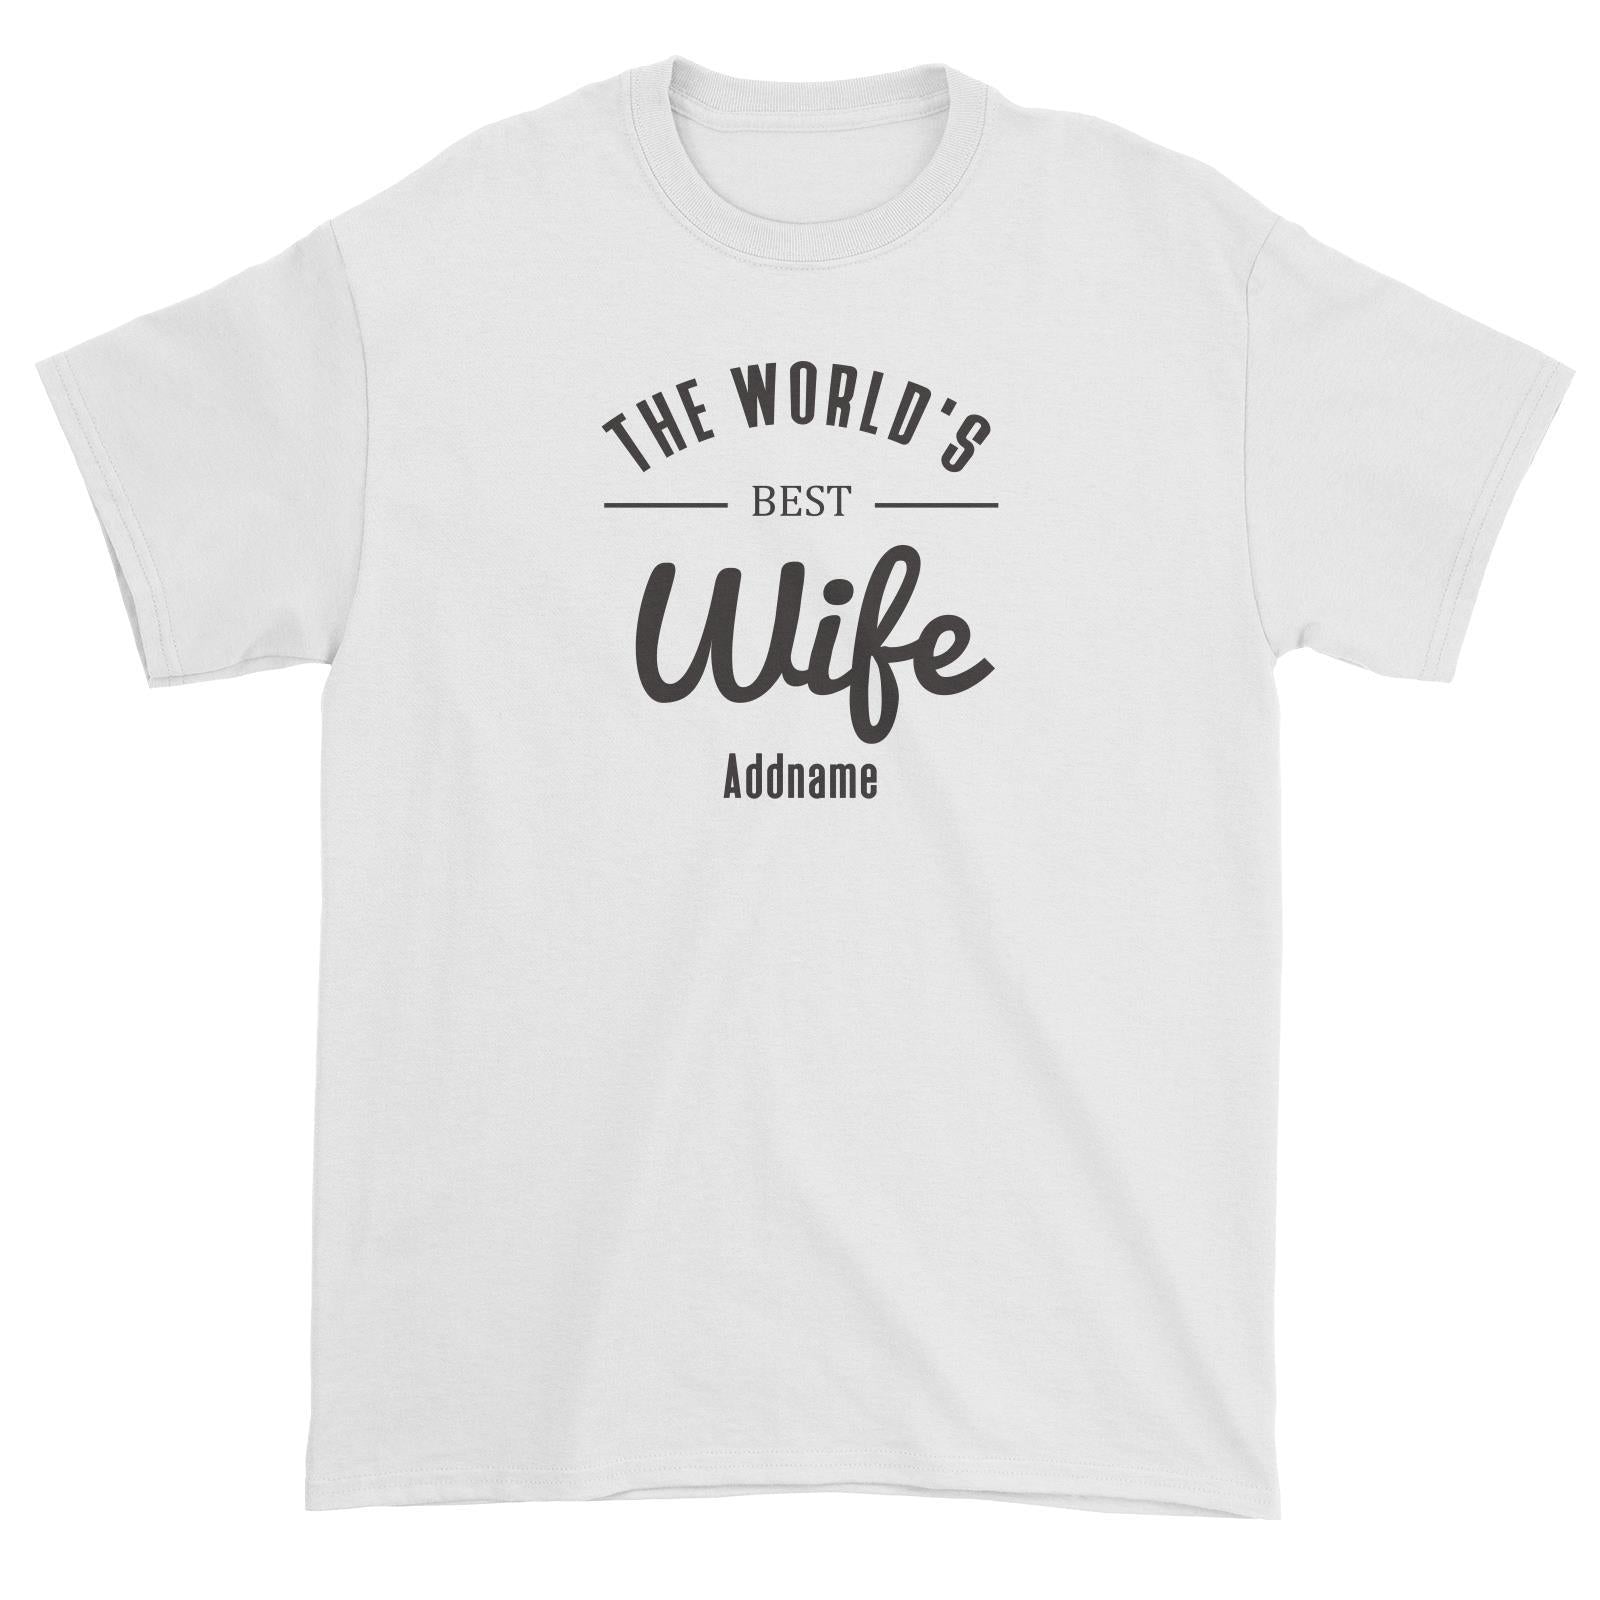 Husband and Wife The World's Best Wife Addname Unisex T-Shirt